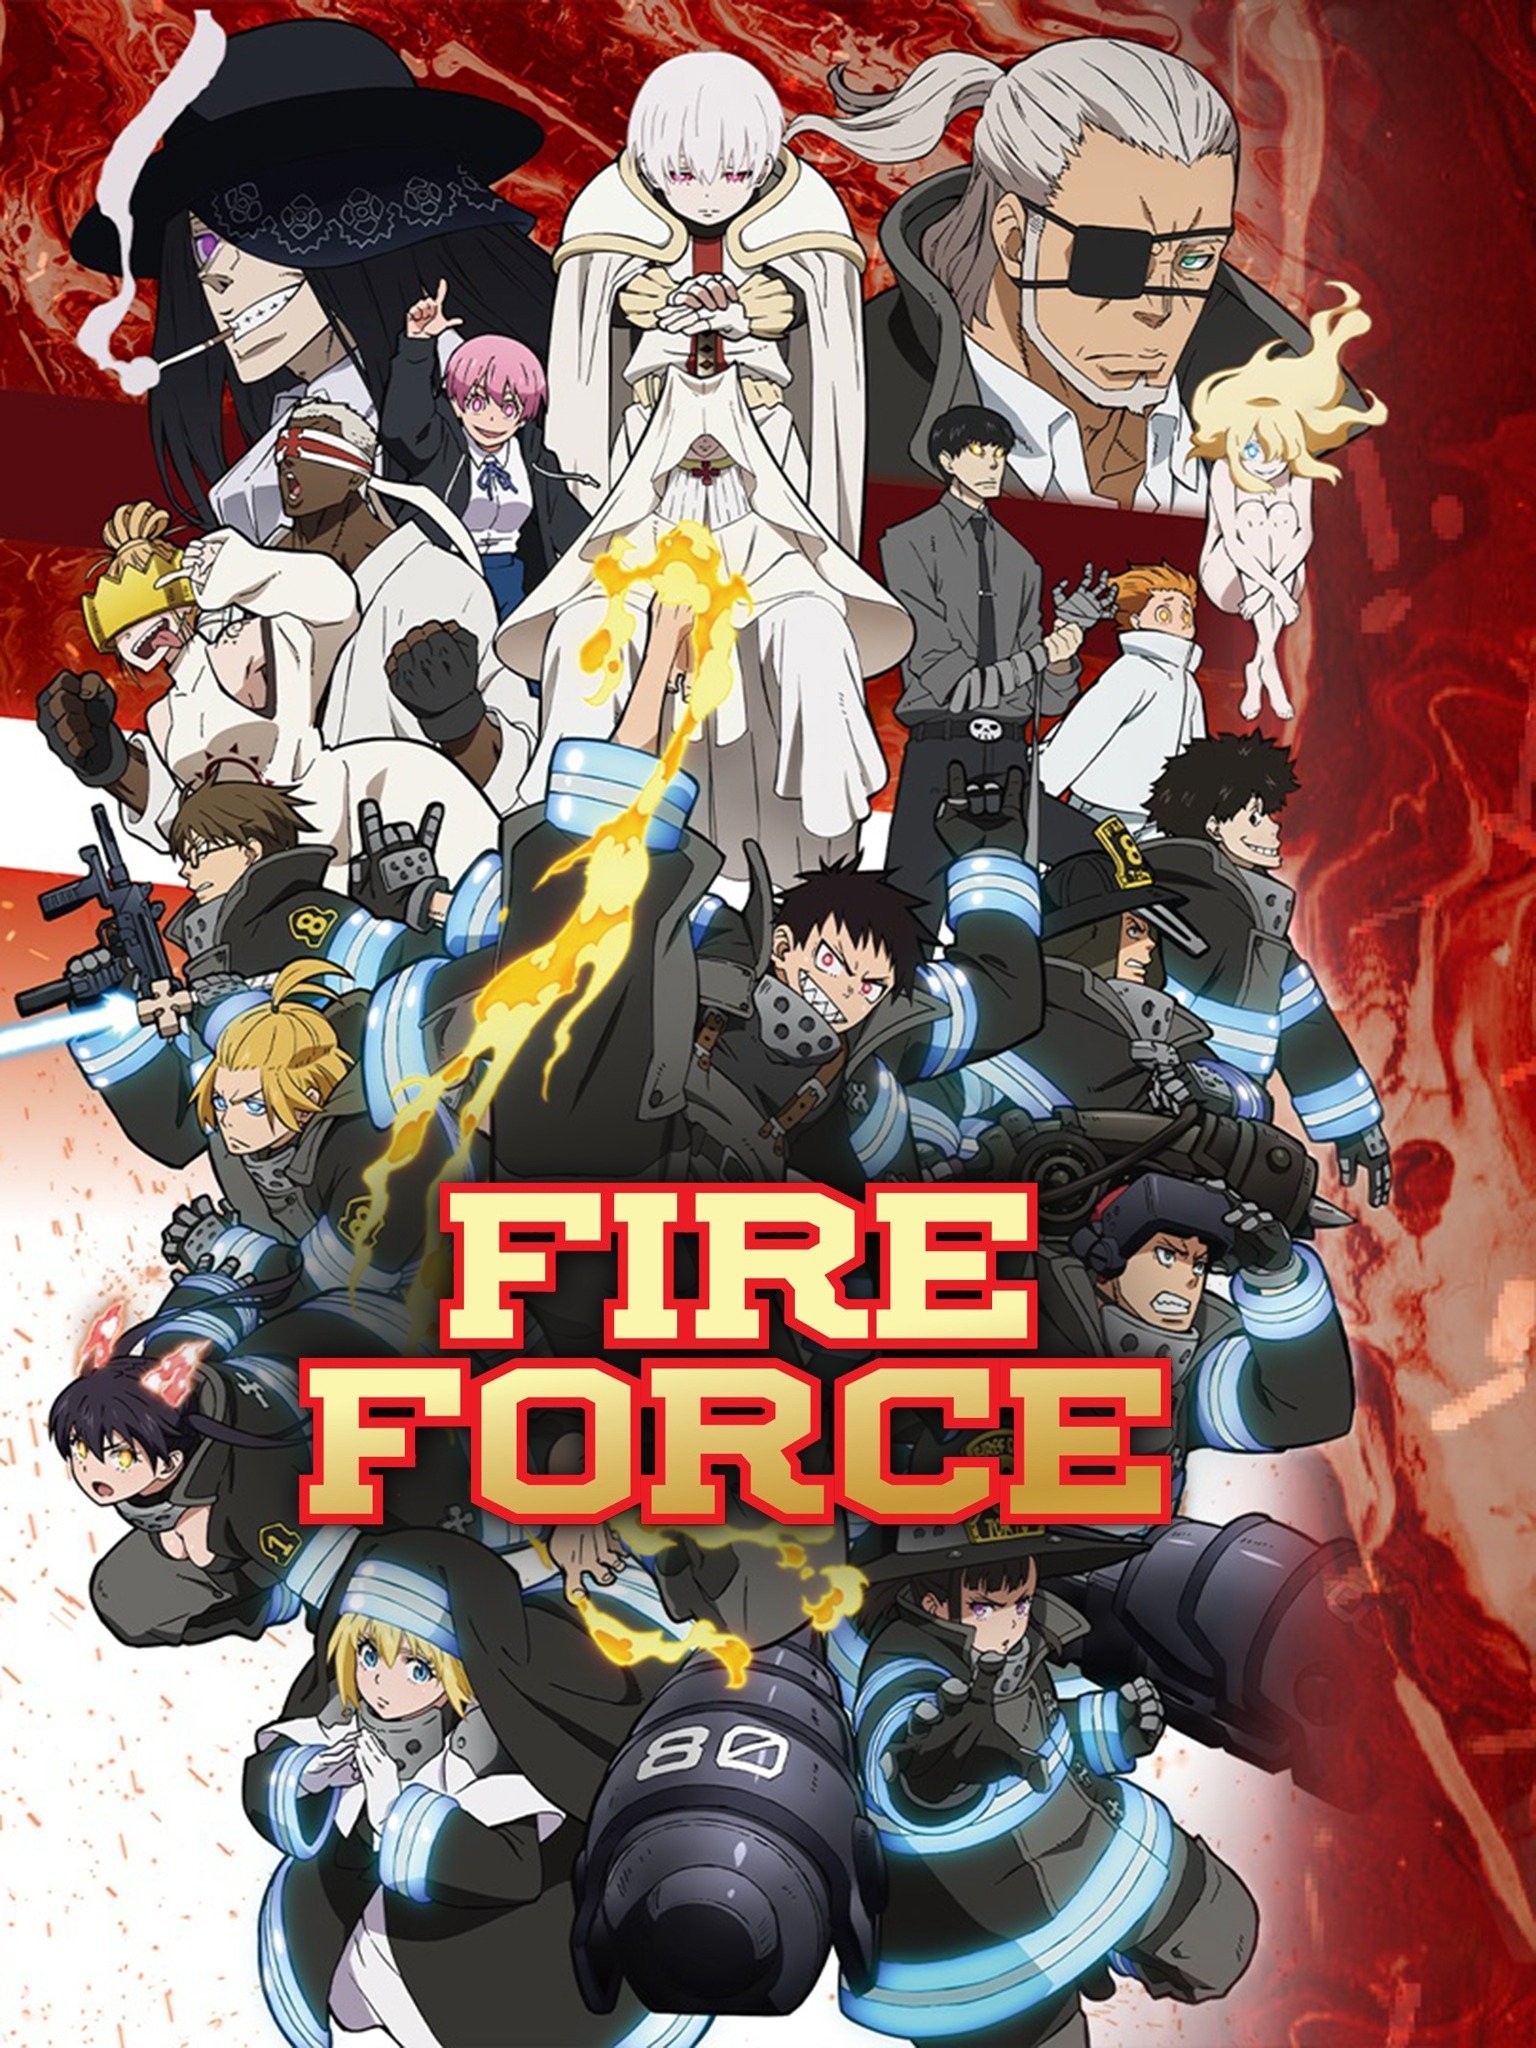 Fire Force S2E2 Review - Best In Show - Crow's World of Anime